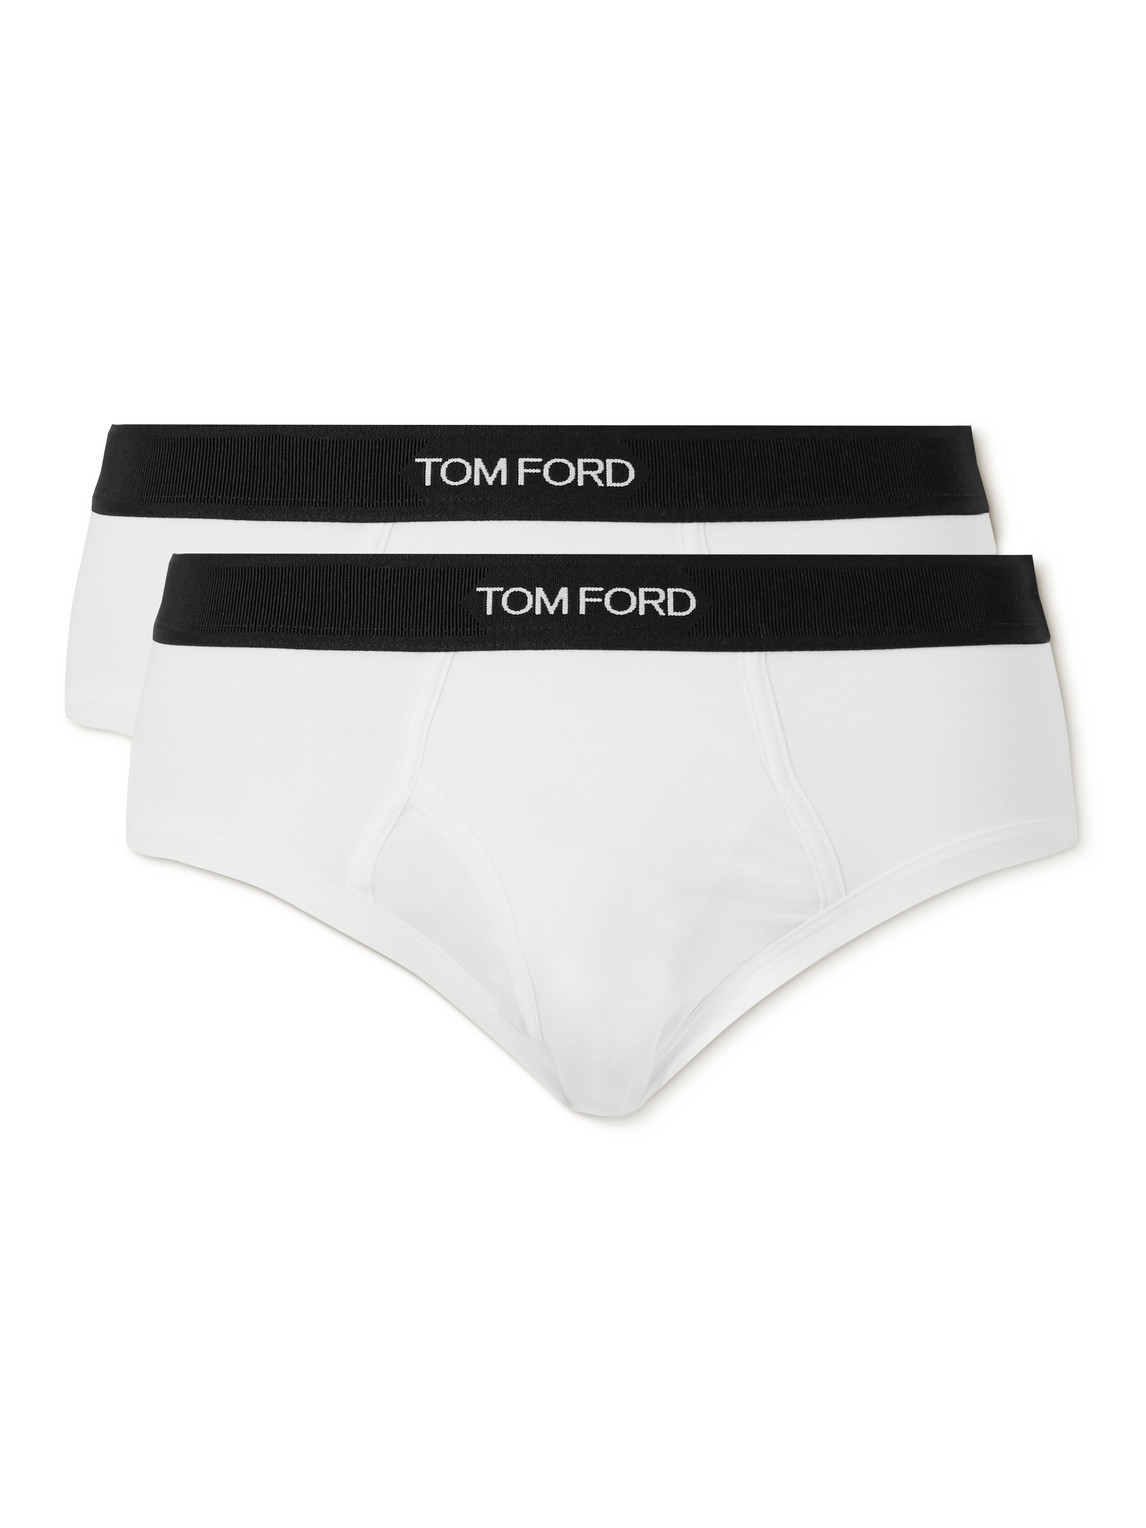 TOM FORD - Two-Pack Stretch Cotton and Modal-Blend Briefs - Men - White - M von TOM FORD